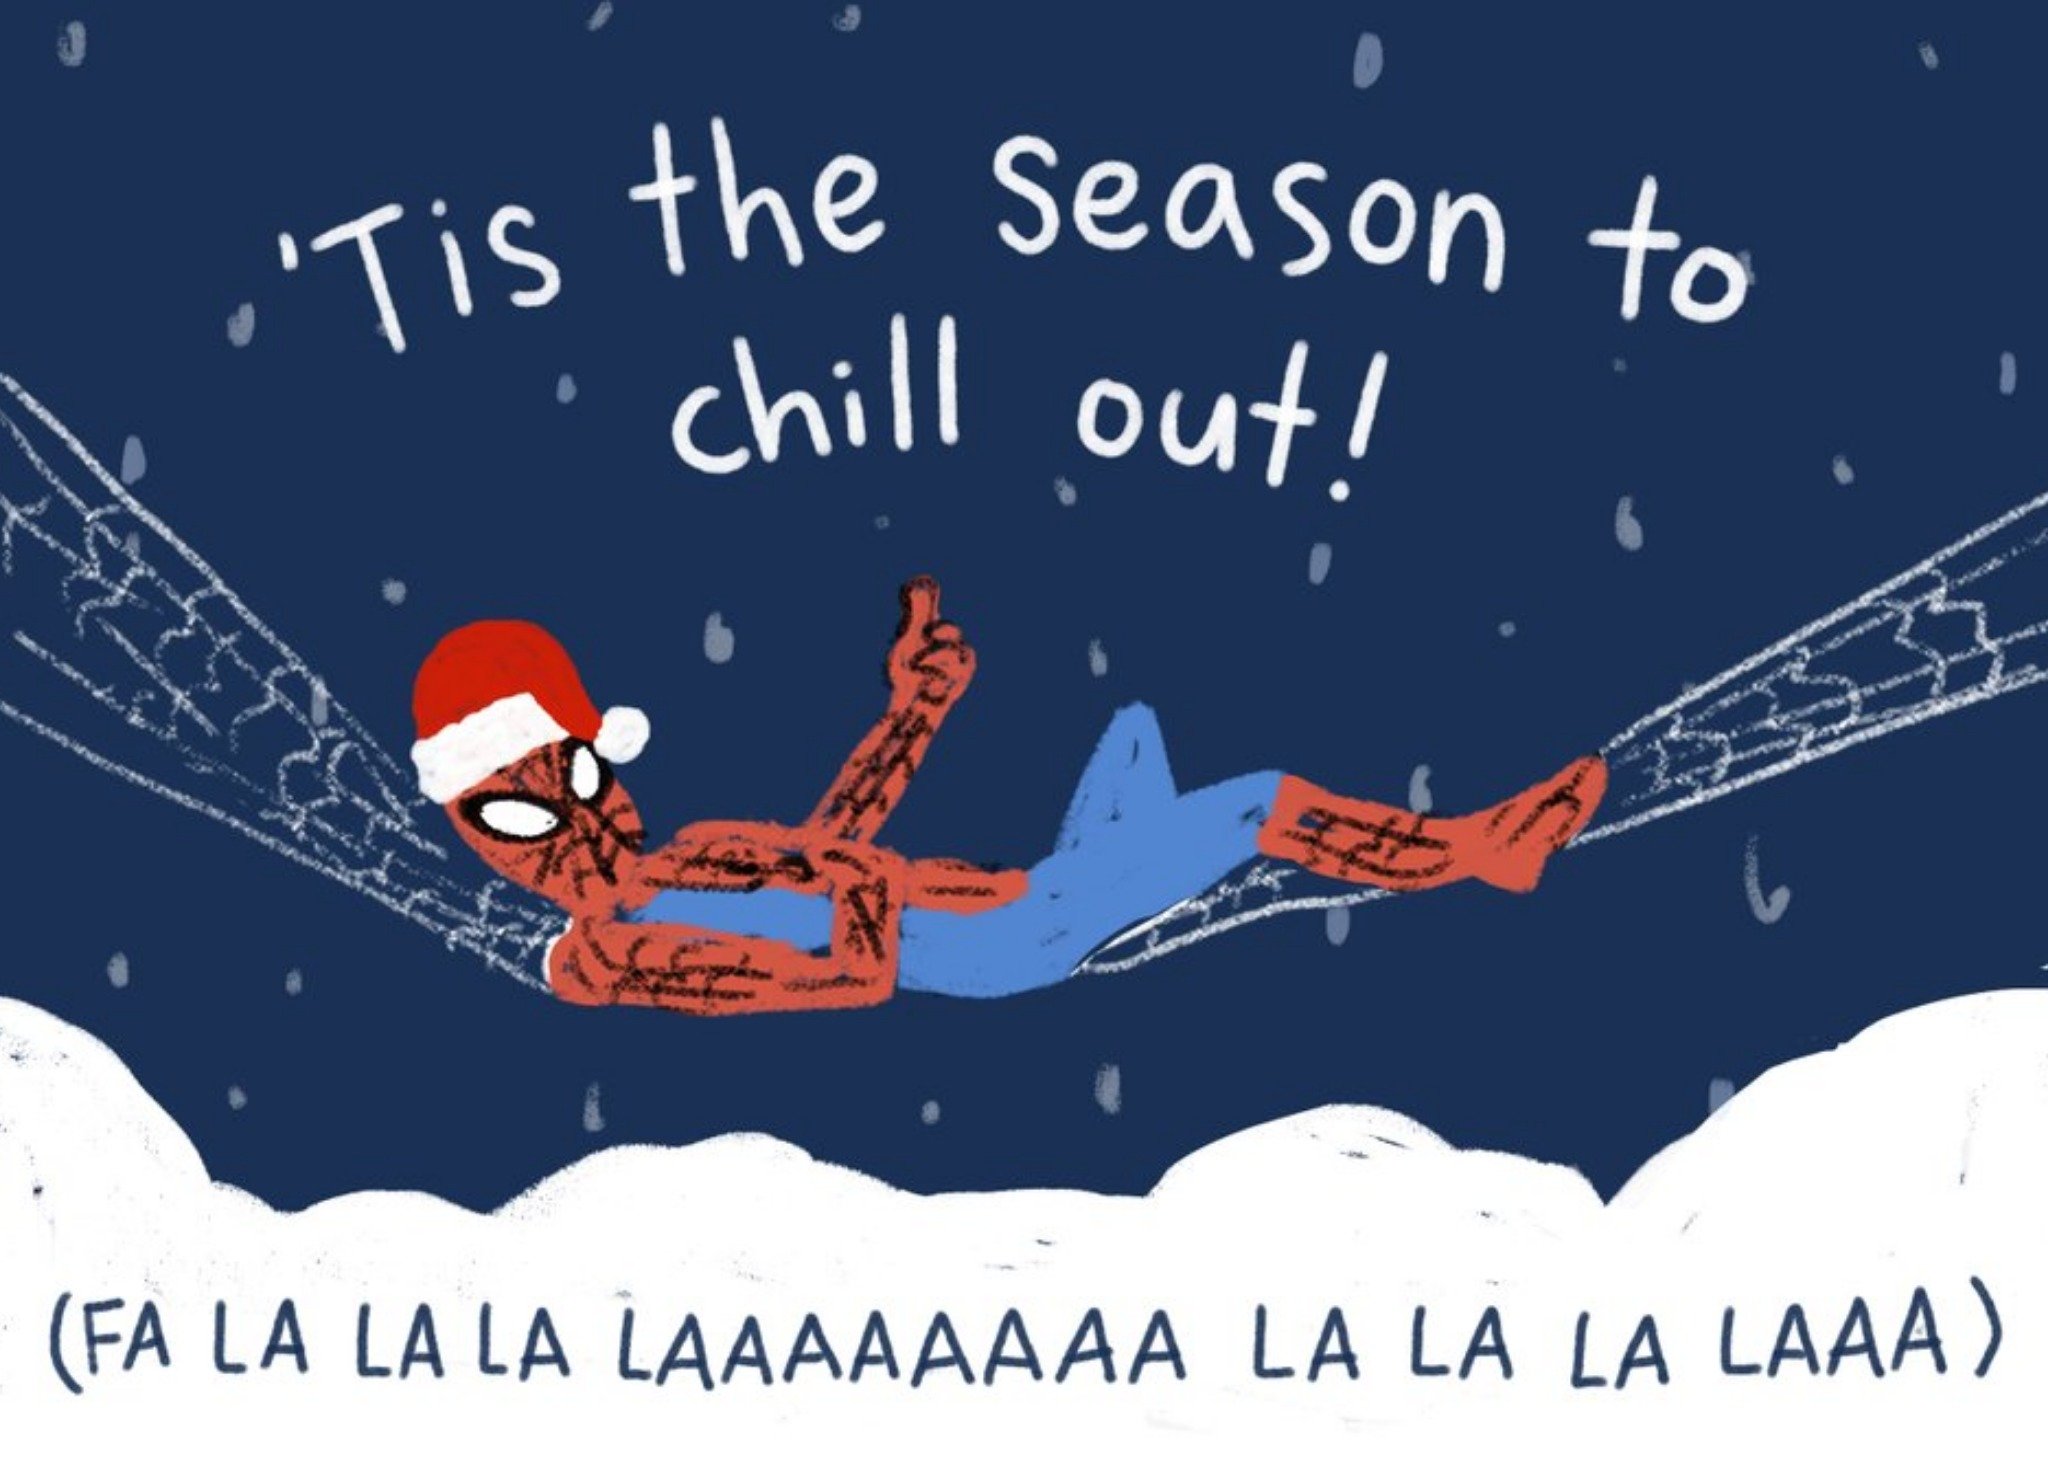 Disney Marvel Spiderman Tis The Season To Chill Out Christmas Card, Large